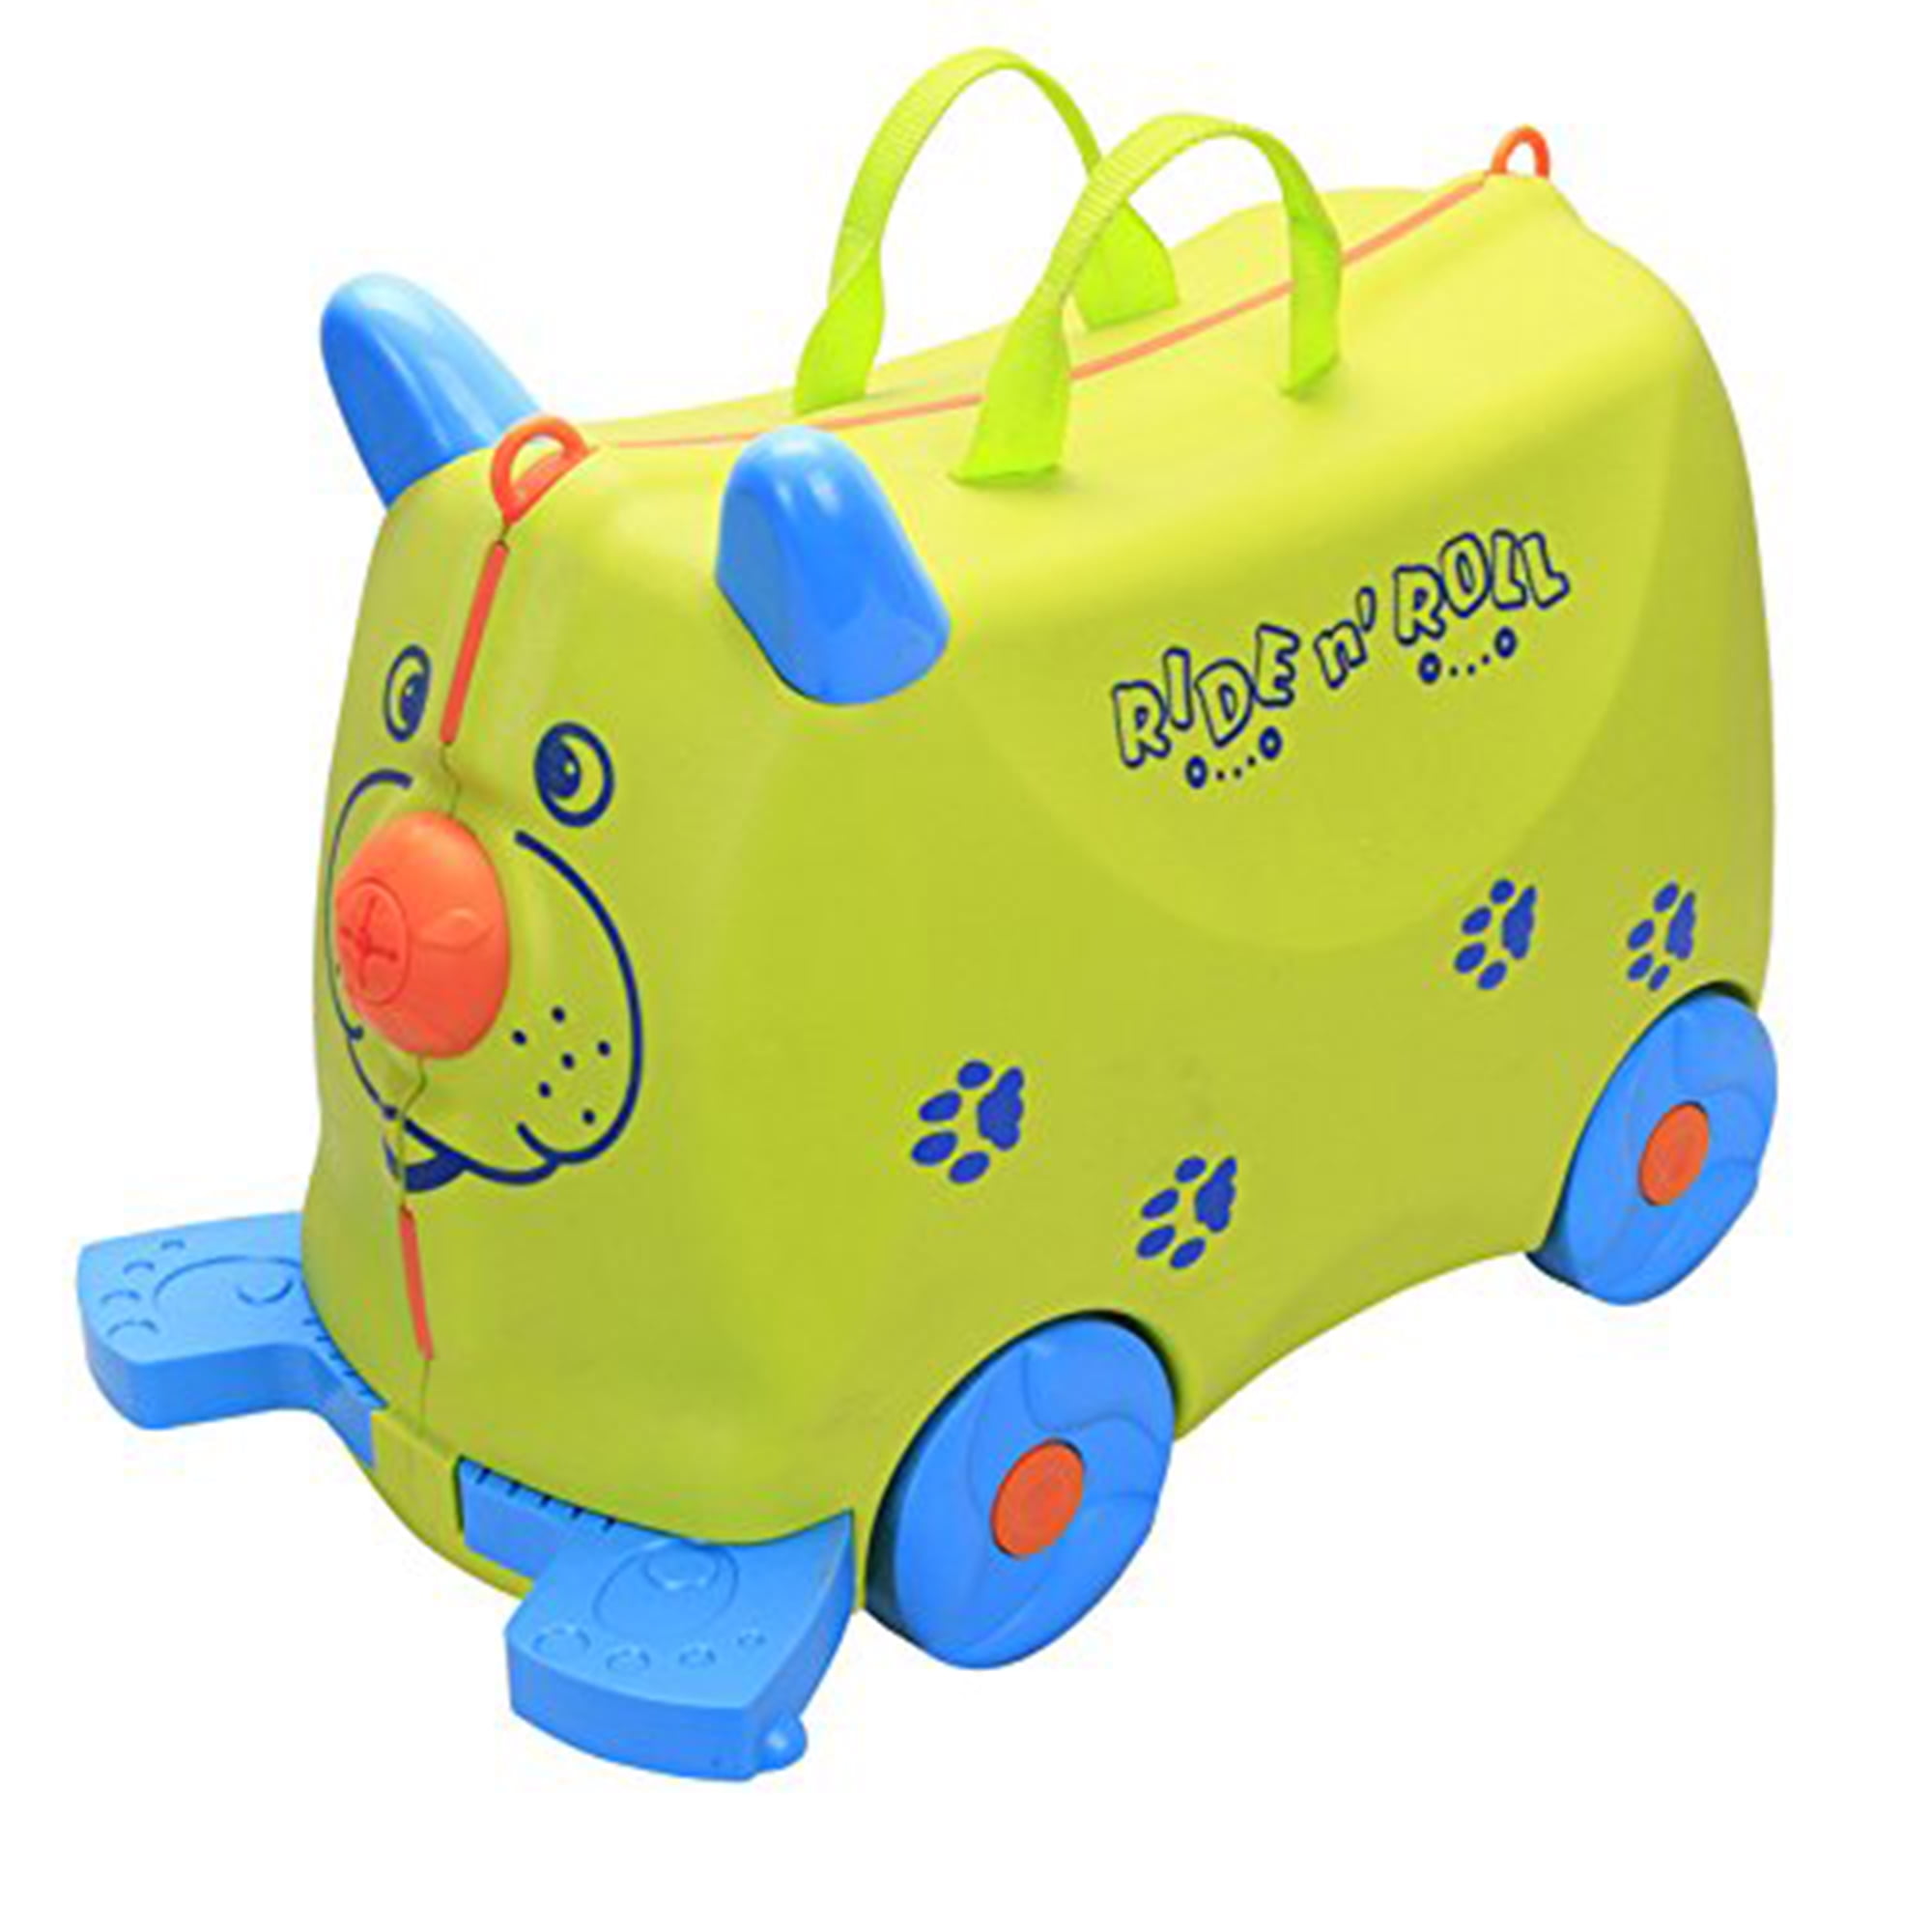 childrens ride on suitcase